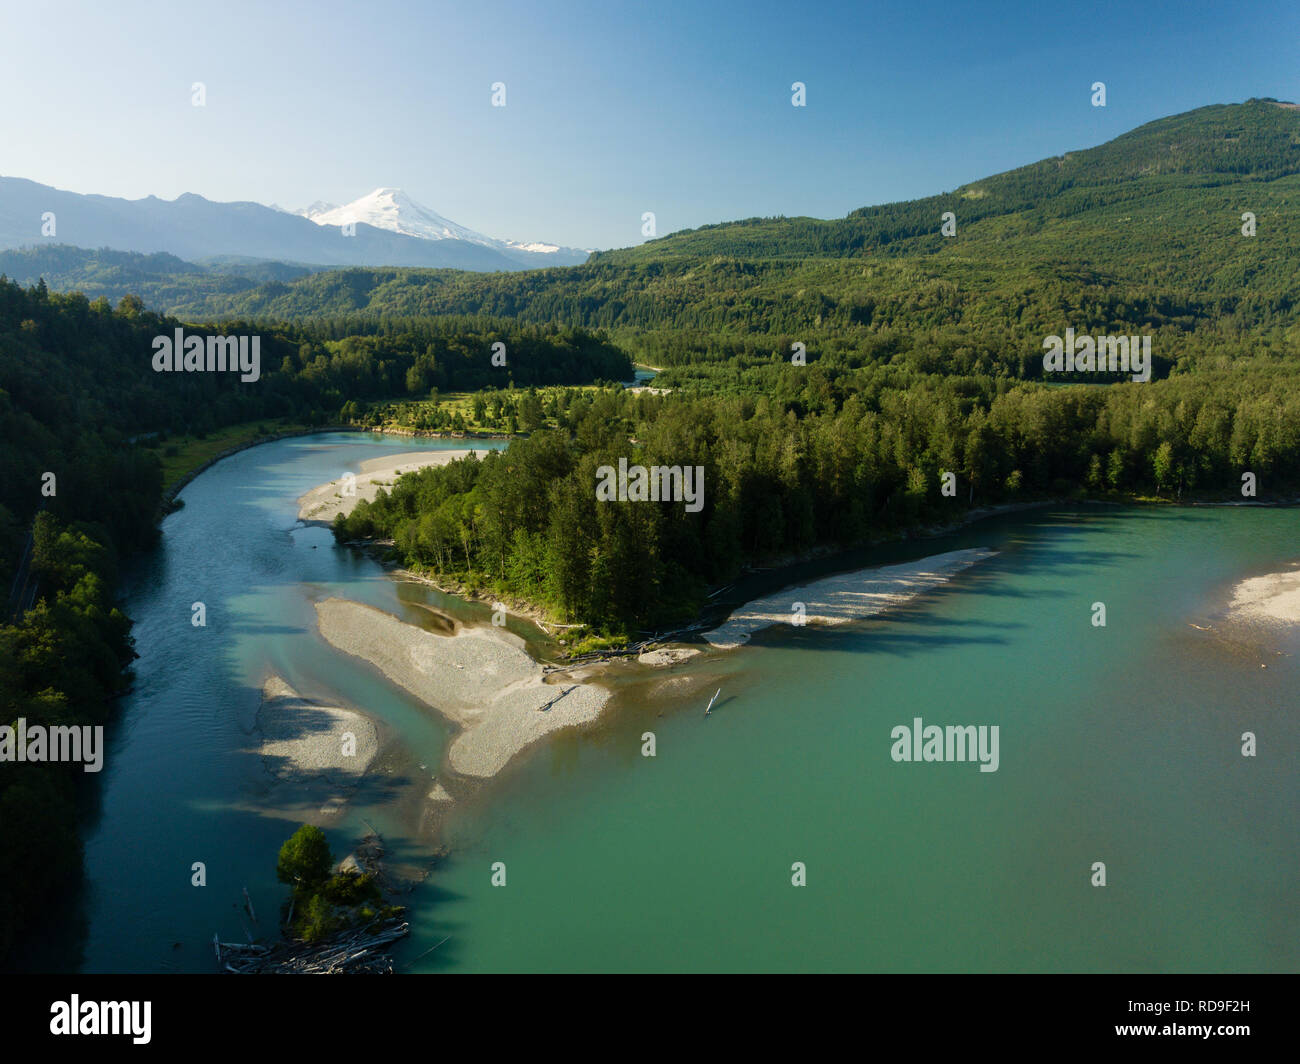 An aerial view of the Skagit River near Concrete, WA. Mt. Baker is in the background. Stock Photo